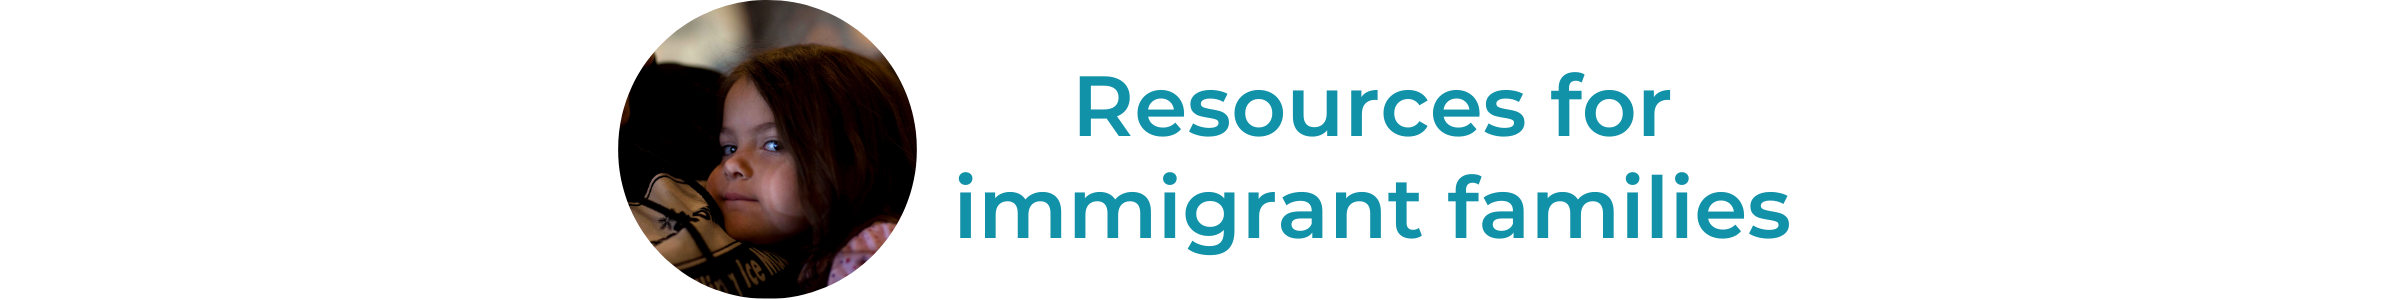 Resources for immigrant families